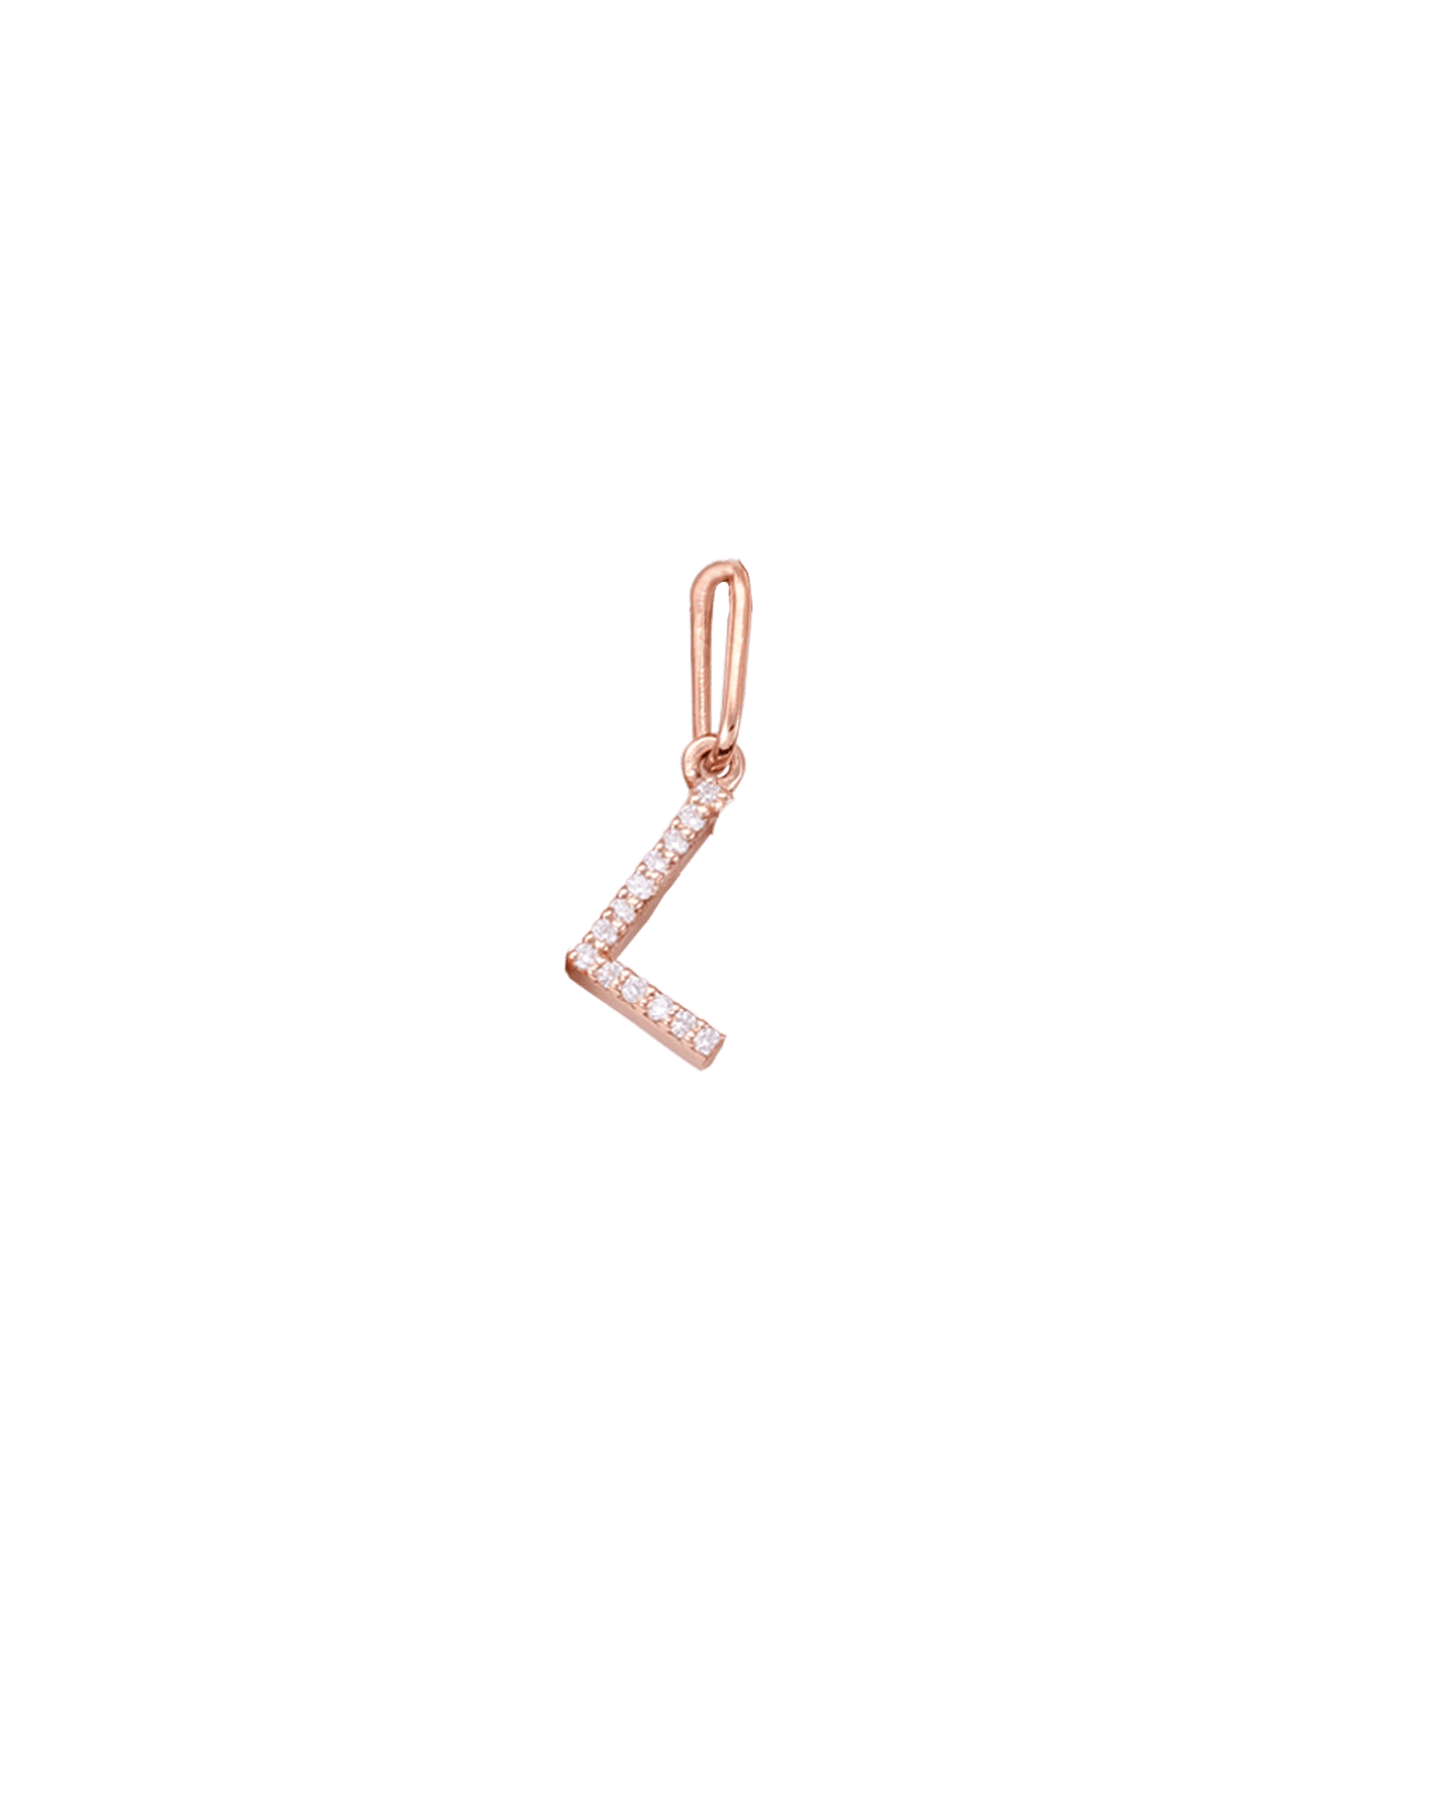 Frosted Charm - 14K Rose Gold Charm magal-dev 